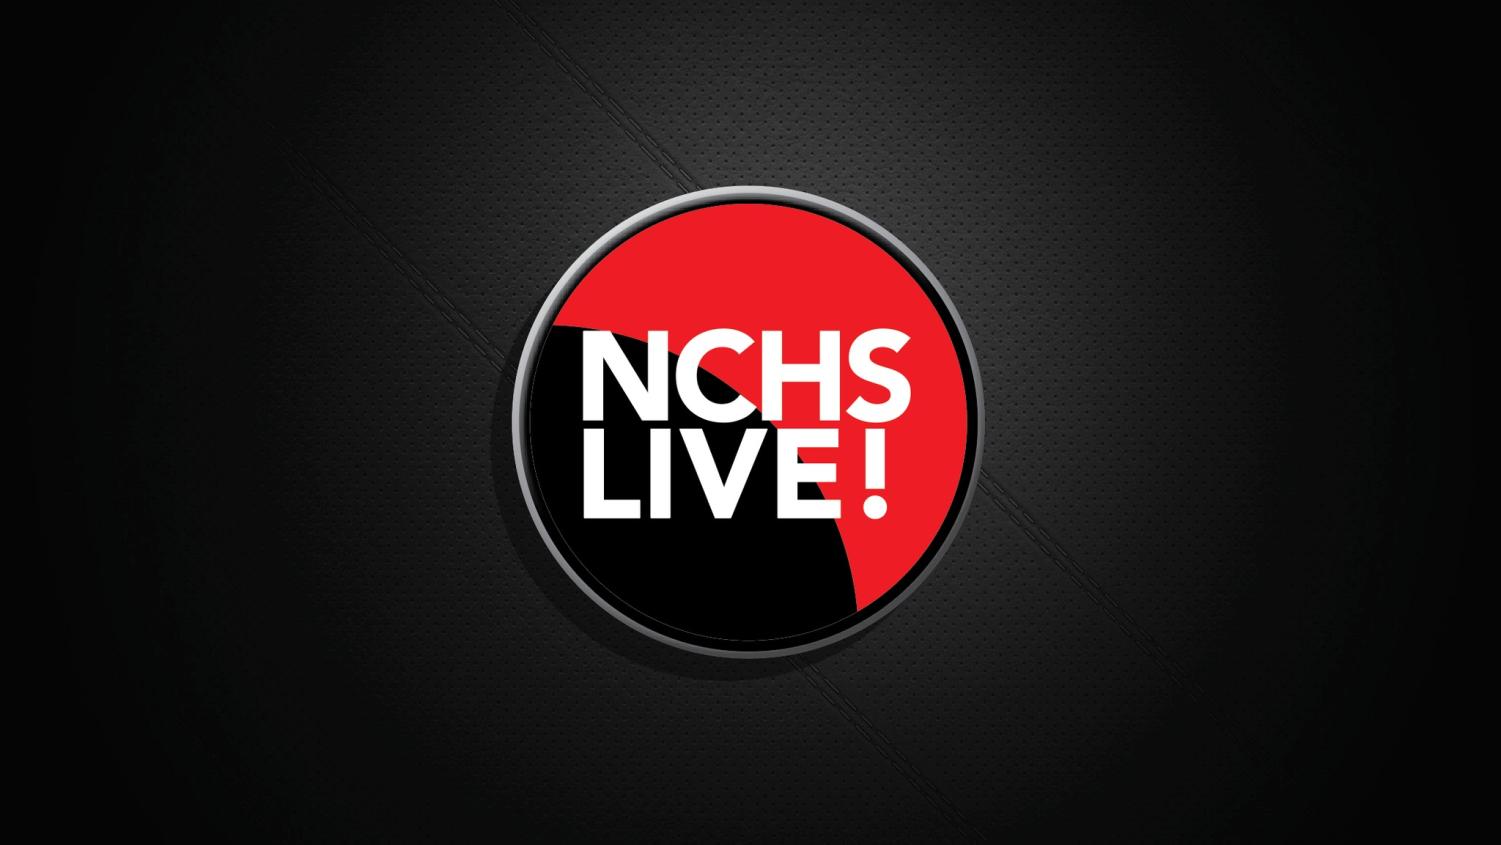 About NCHS LIVE!